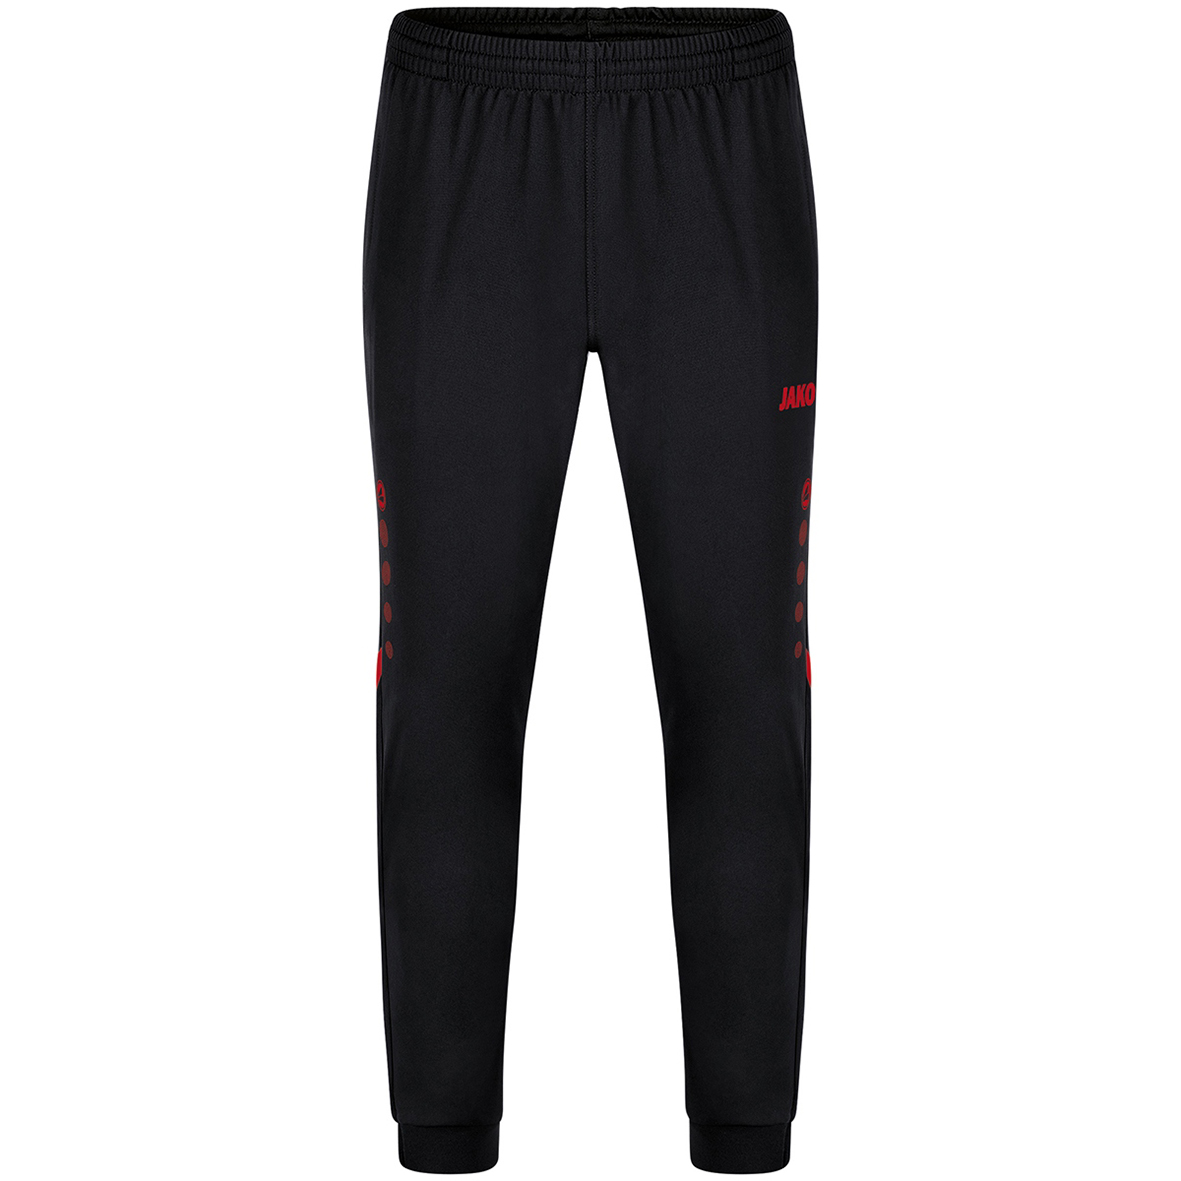 POLYESTER TROUSERS JAKO CHALLENGE, BLACK-RED WOMEN.